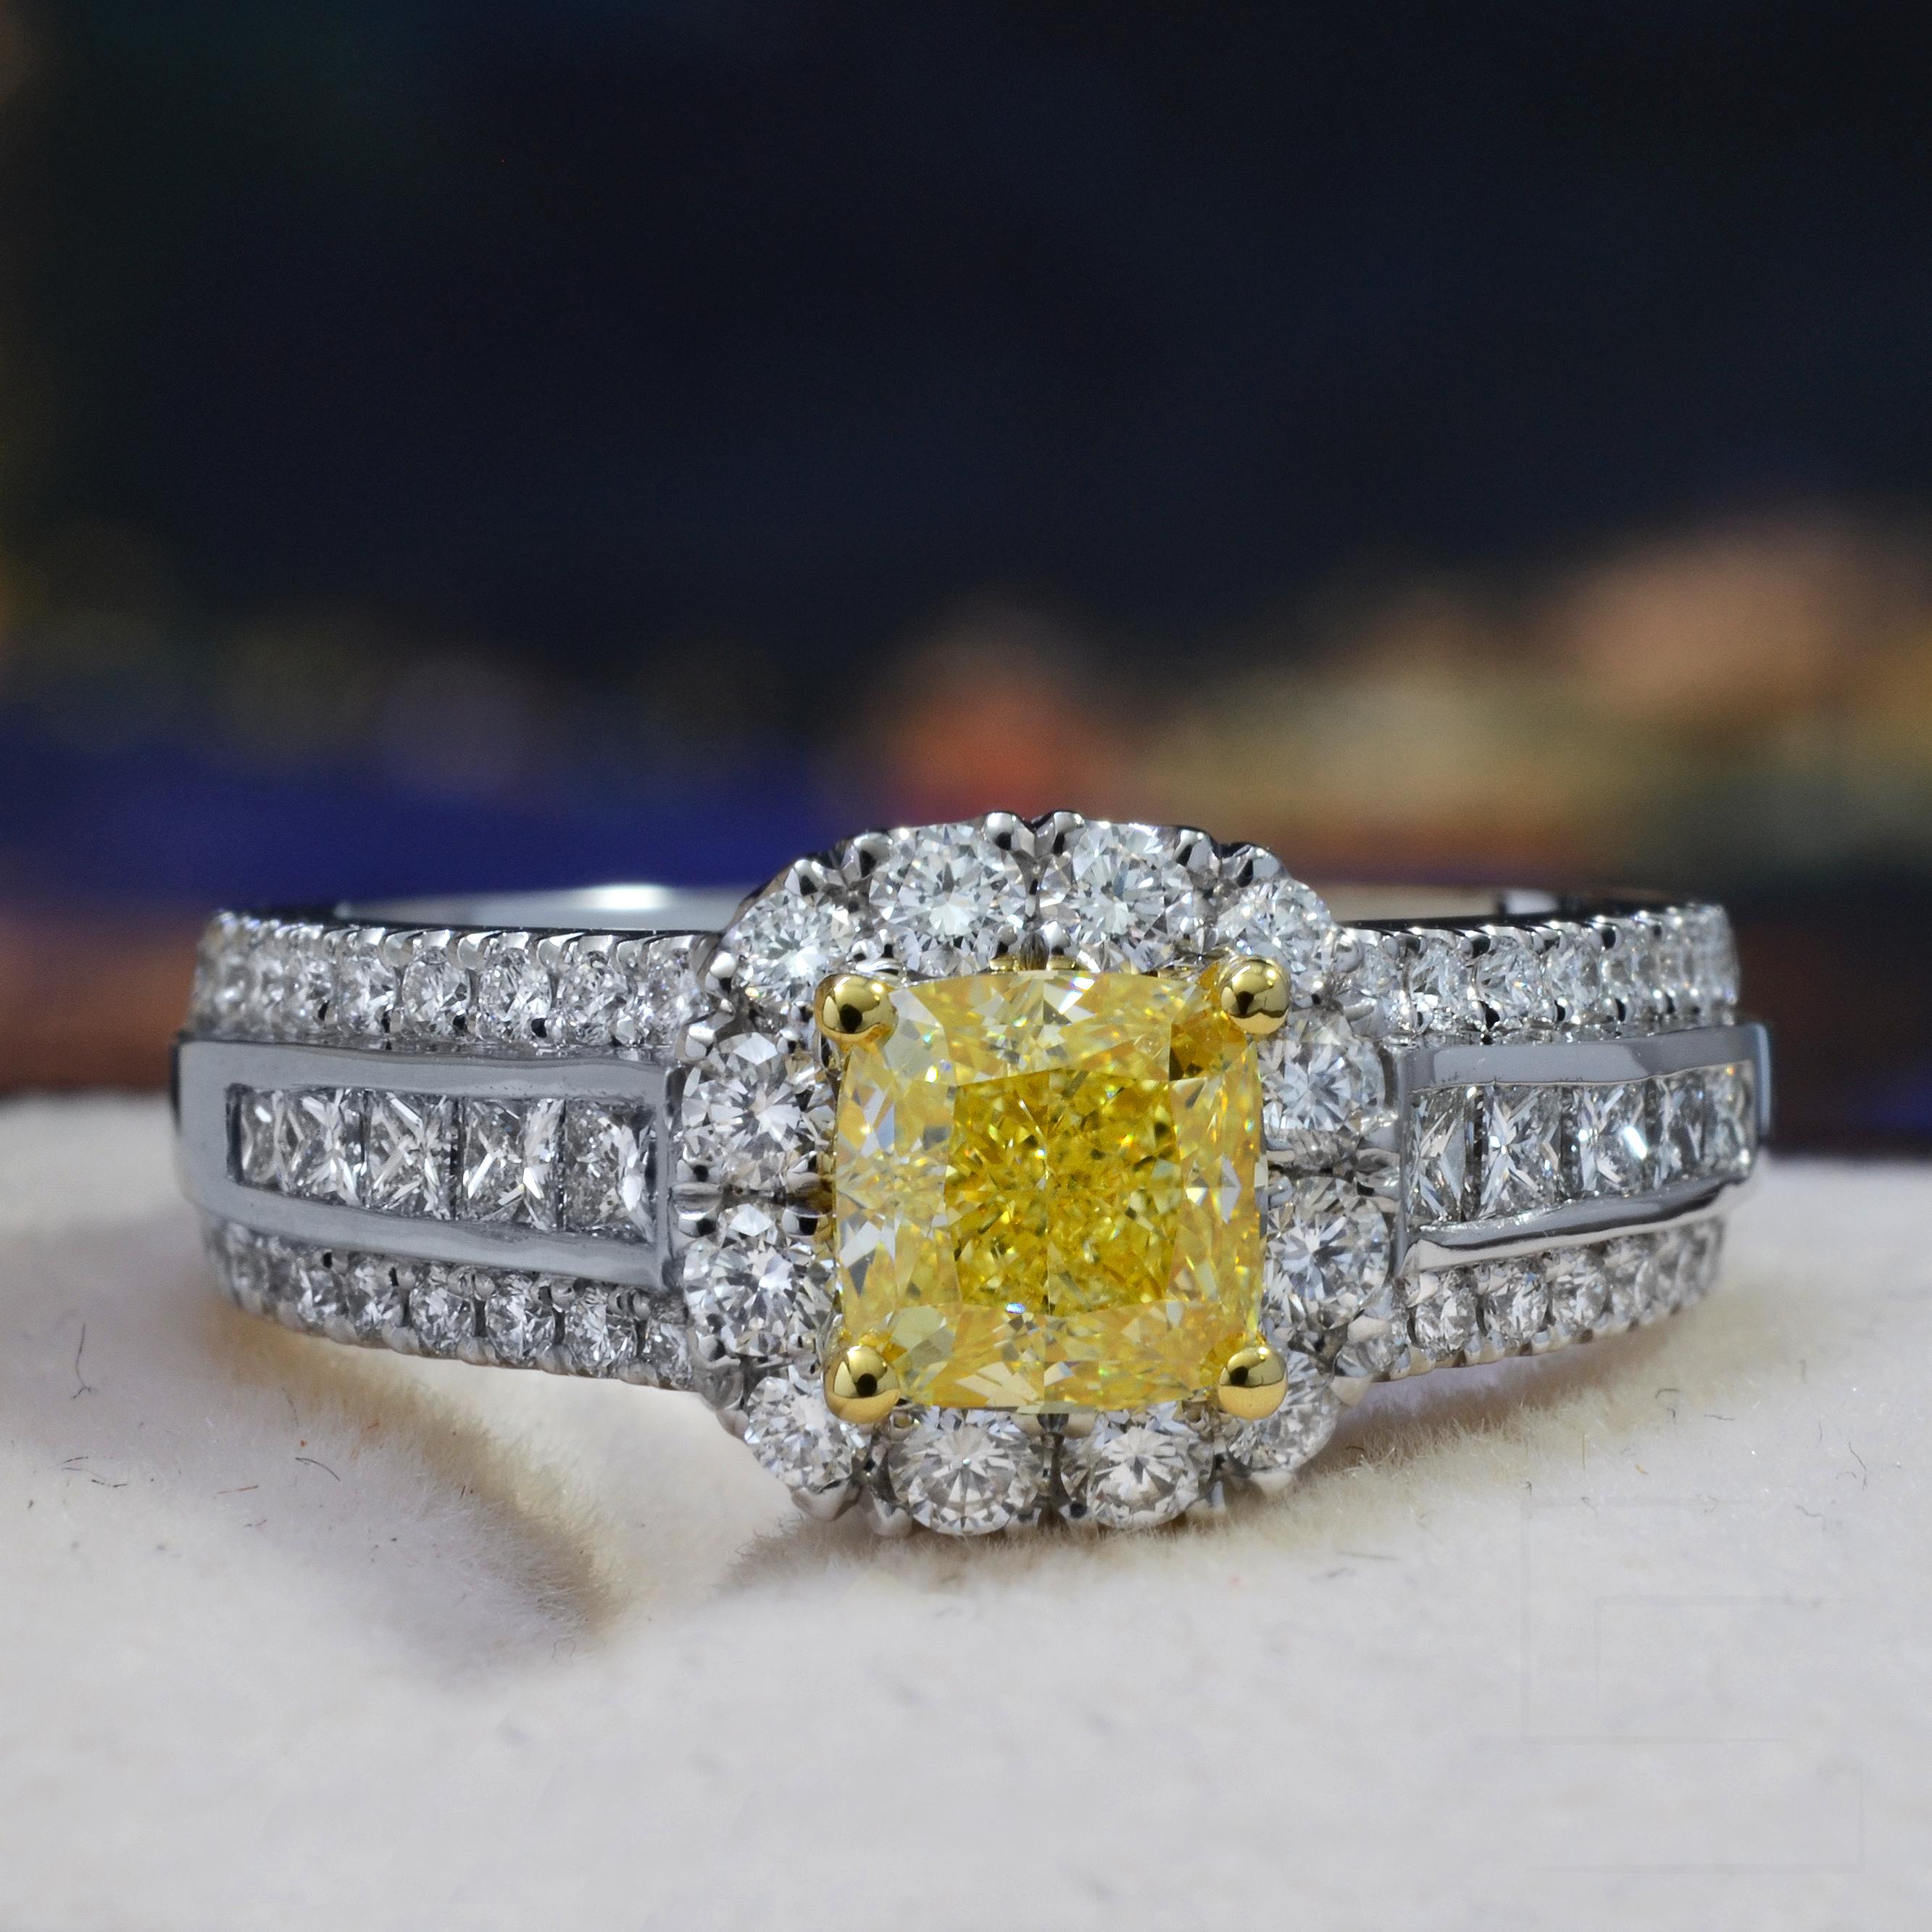 1.85 Ct. Canary Fancy Yellow Cushion Cut Diamond Ring VS2 GIA Certified For Sale 1